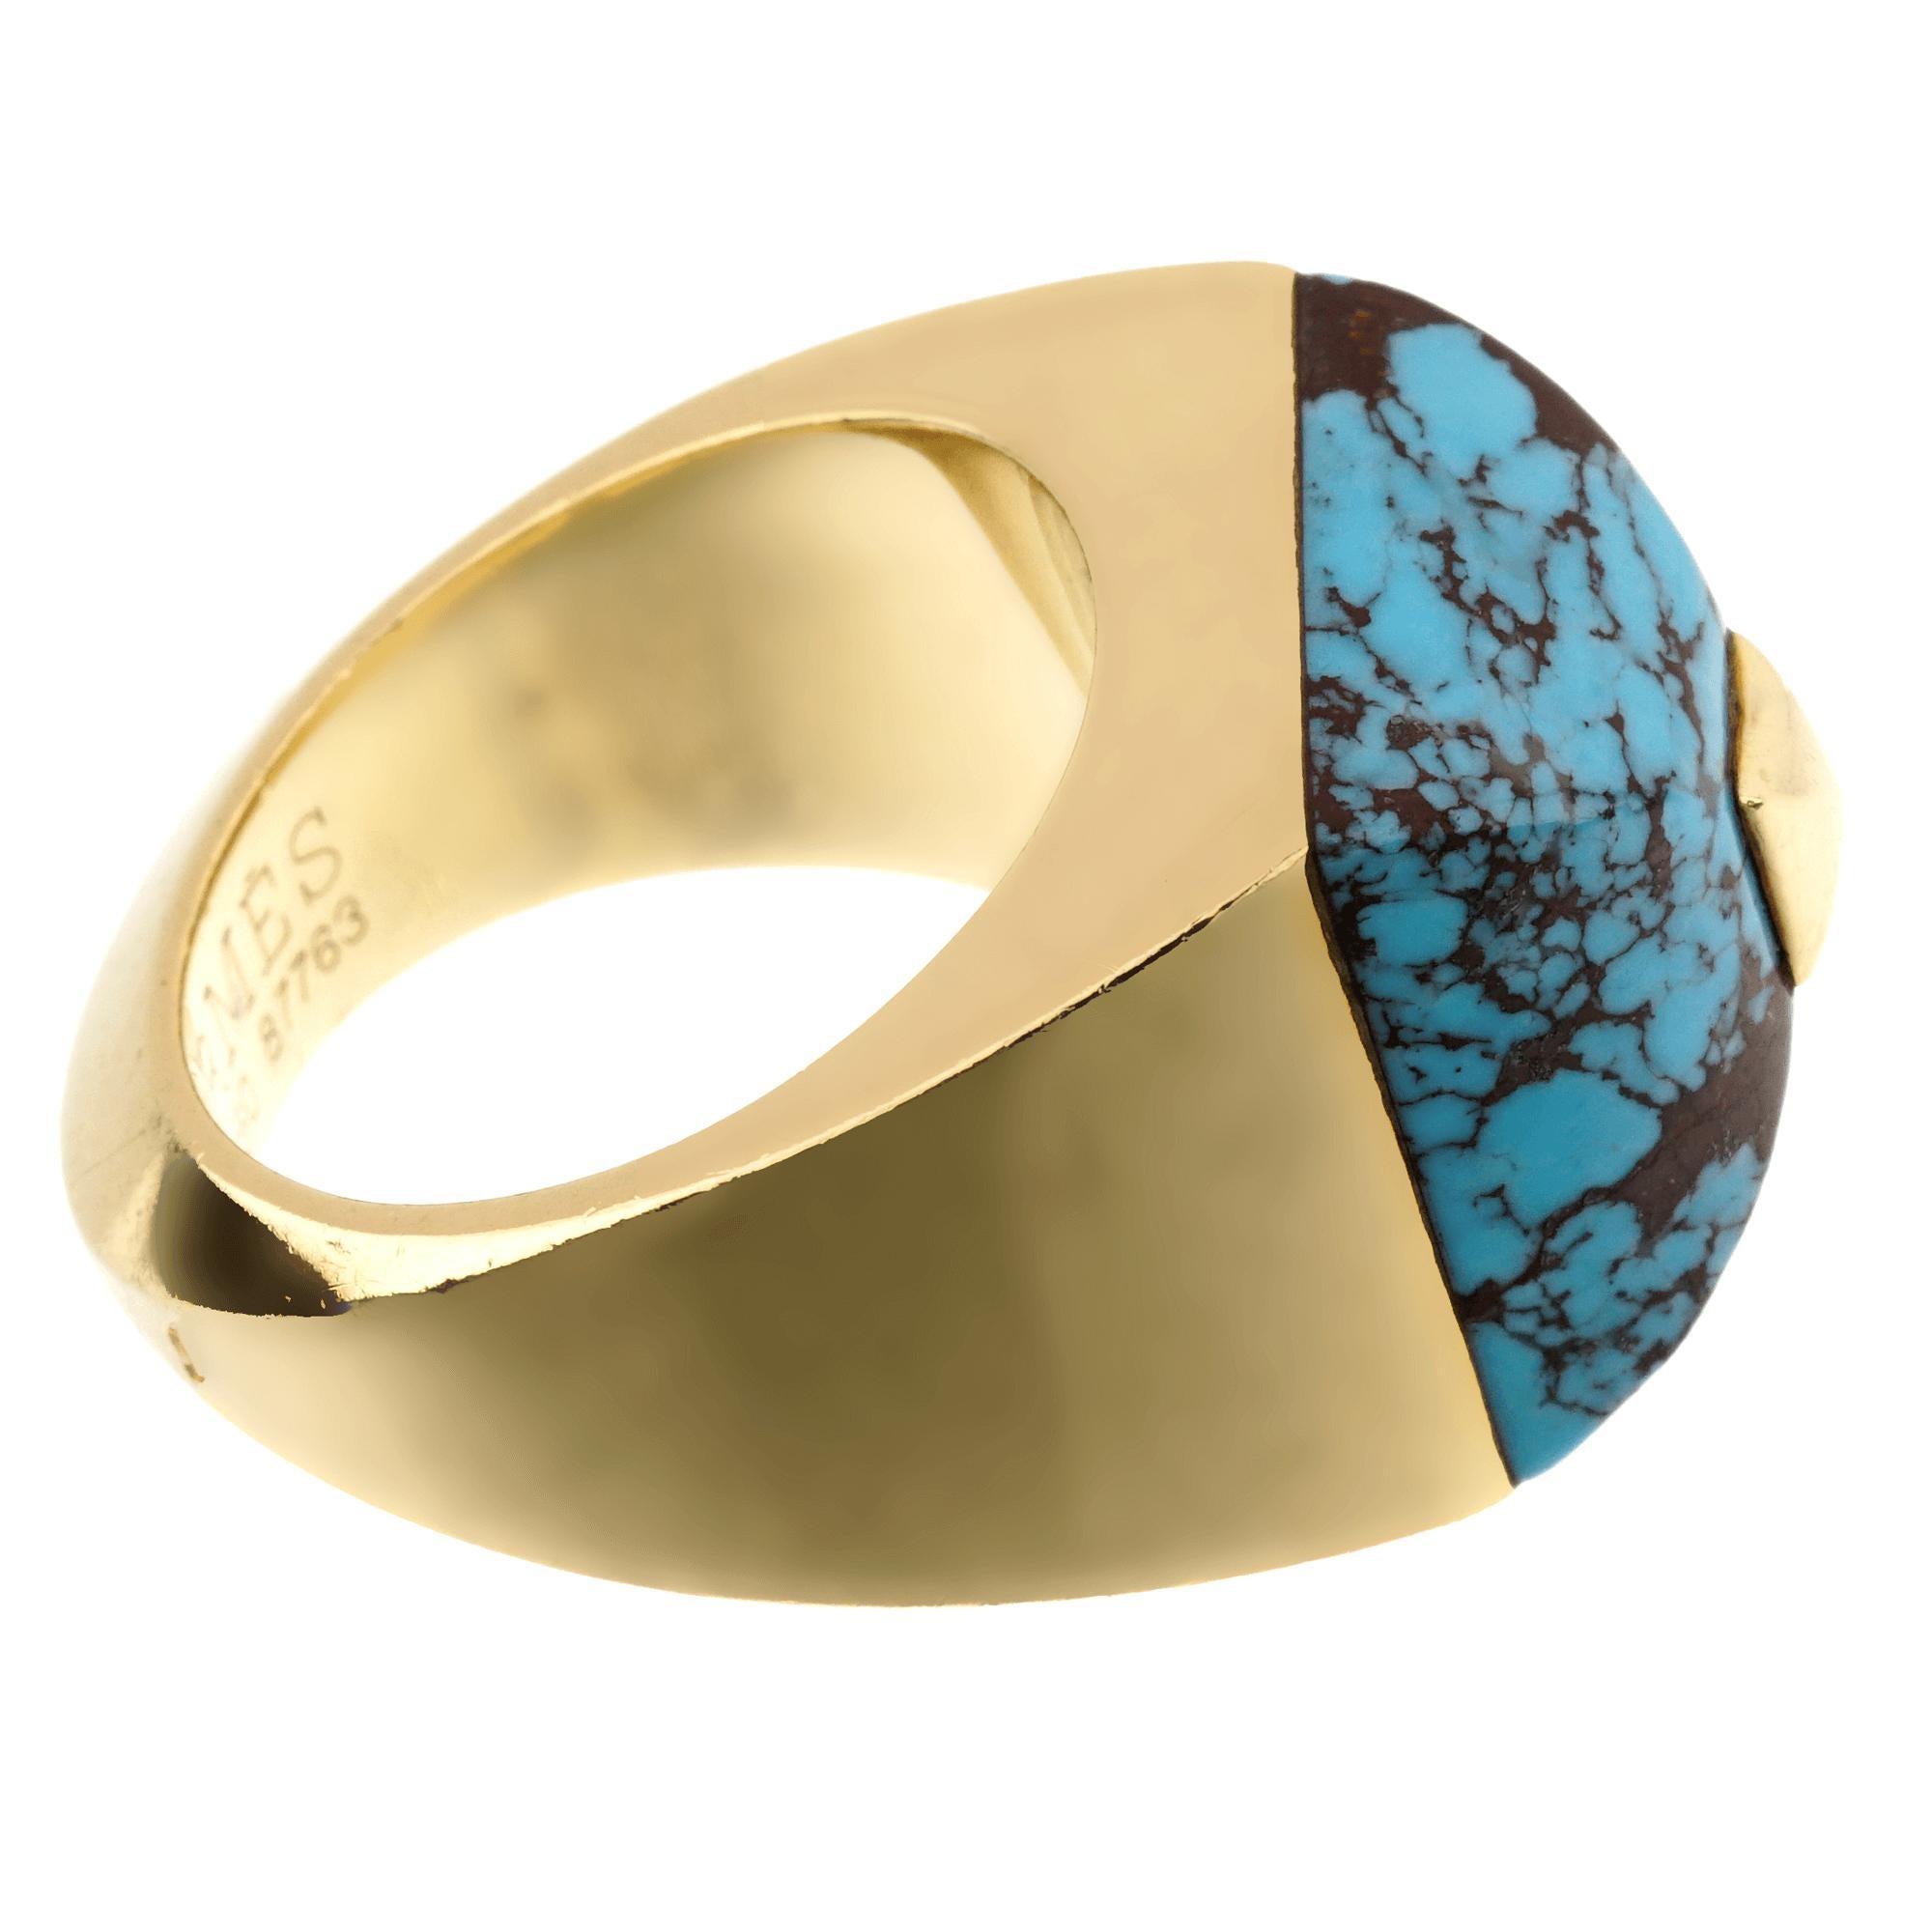 An extremely rare Hermes cocktail ring showcasing an amazing carved turquoise topped with a gold pyramid in 18k yellow gold. 

The ring measures a size 53, 6 1/2 us and can be resized if needed.